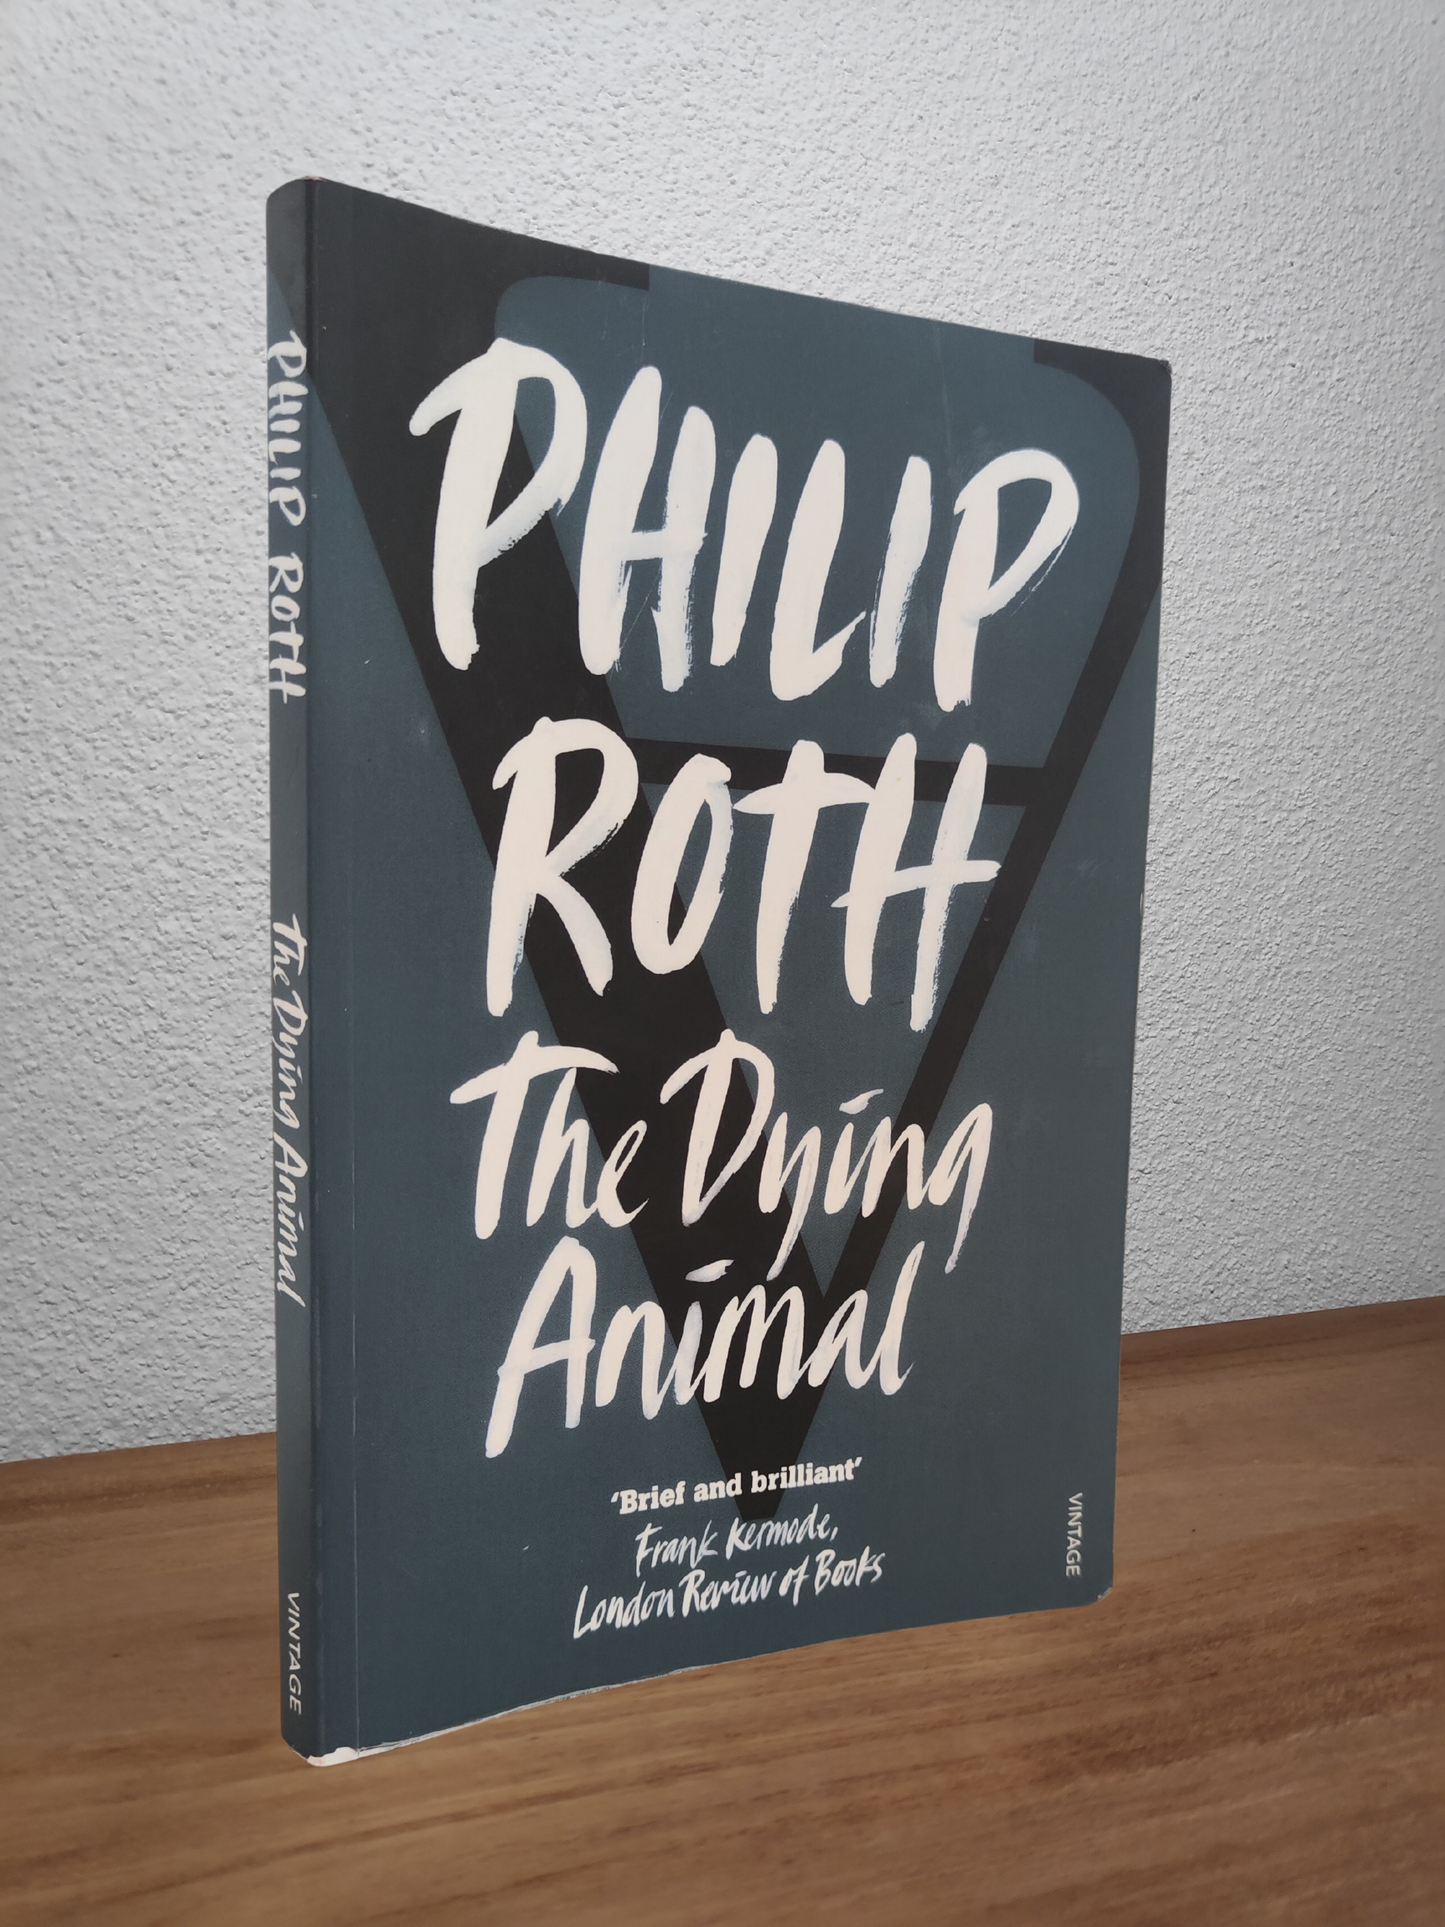 Philip Roth - The Dying Animal